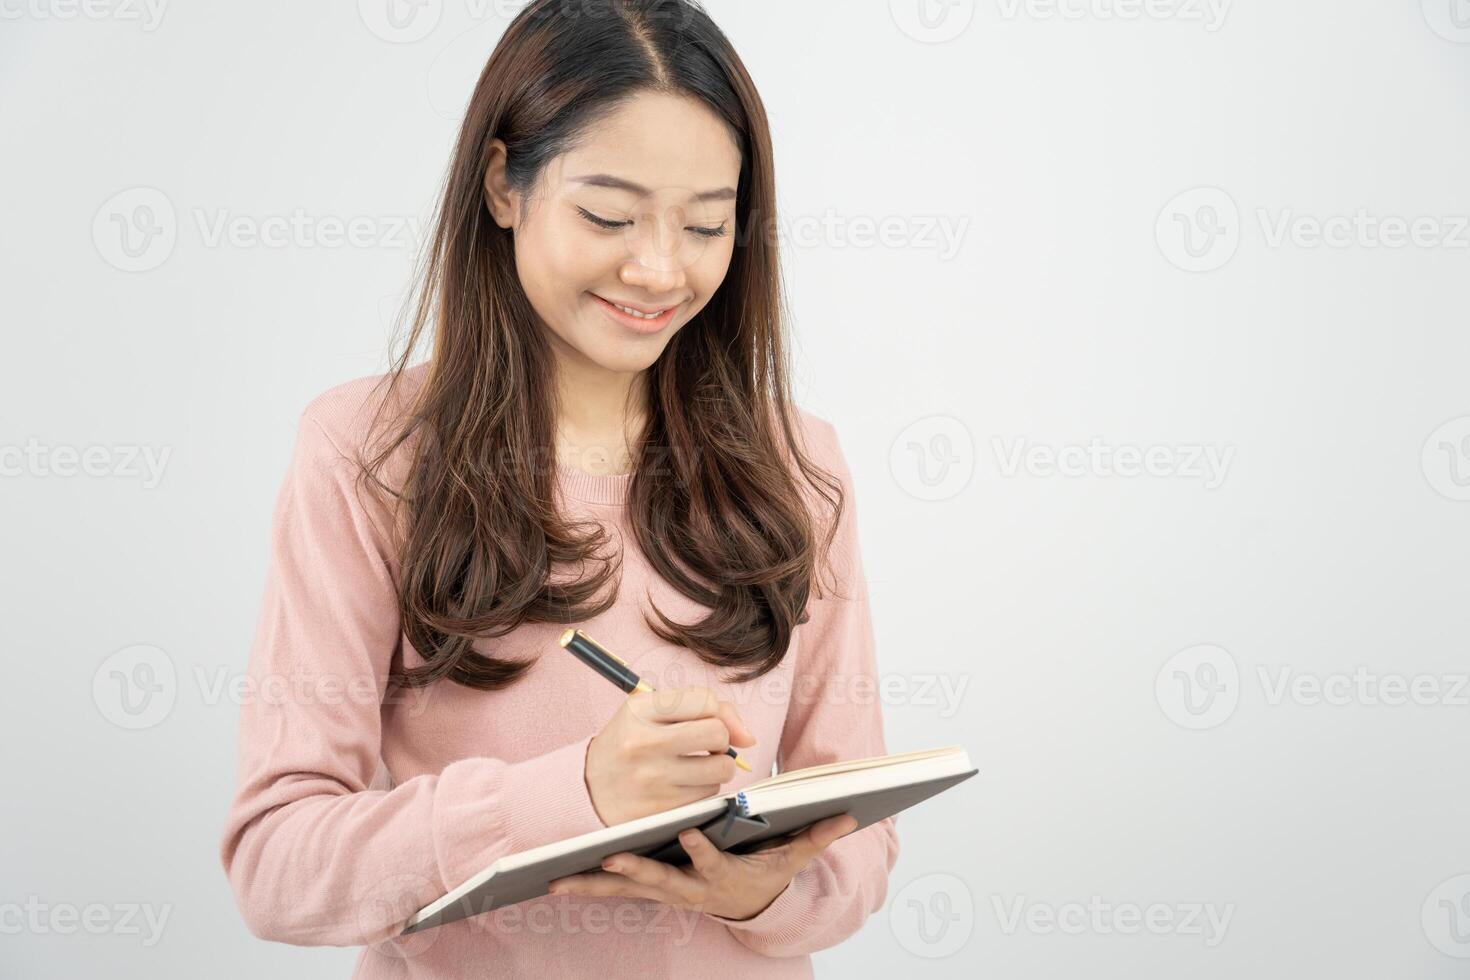 inspiration, writer ,creative ,recreation for imagine, portrait Beautiful Asia attractive young woman writing ideas on notebook, to do list, good thinking work, journalist, Stylish, Dream image, relax photo